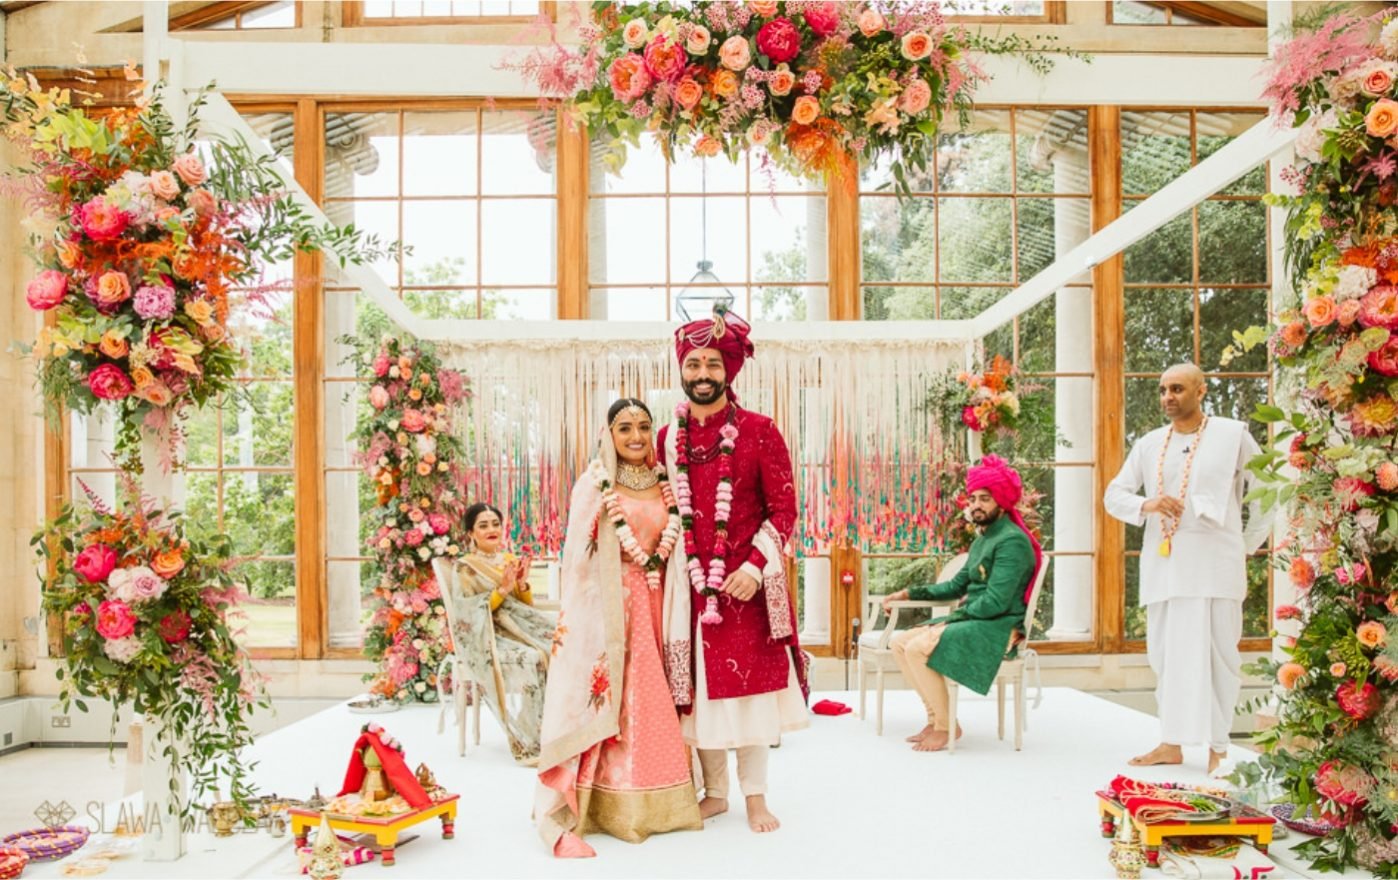 List of Indian Wedding Venues In New Jersey